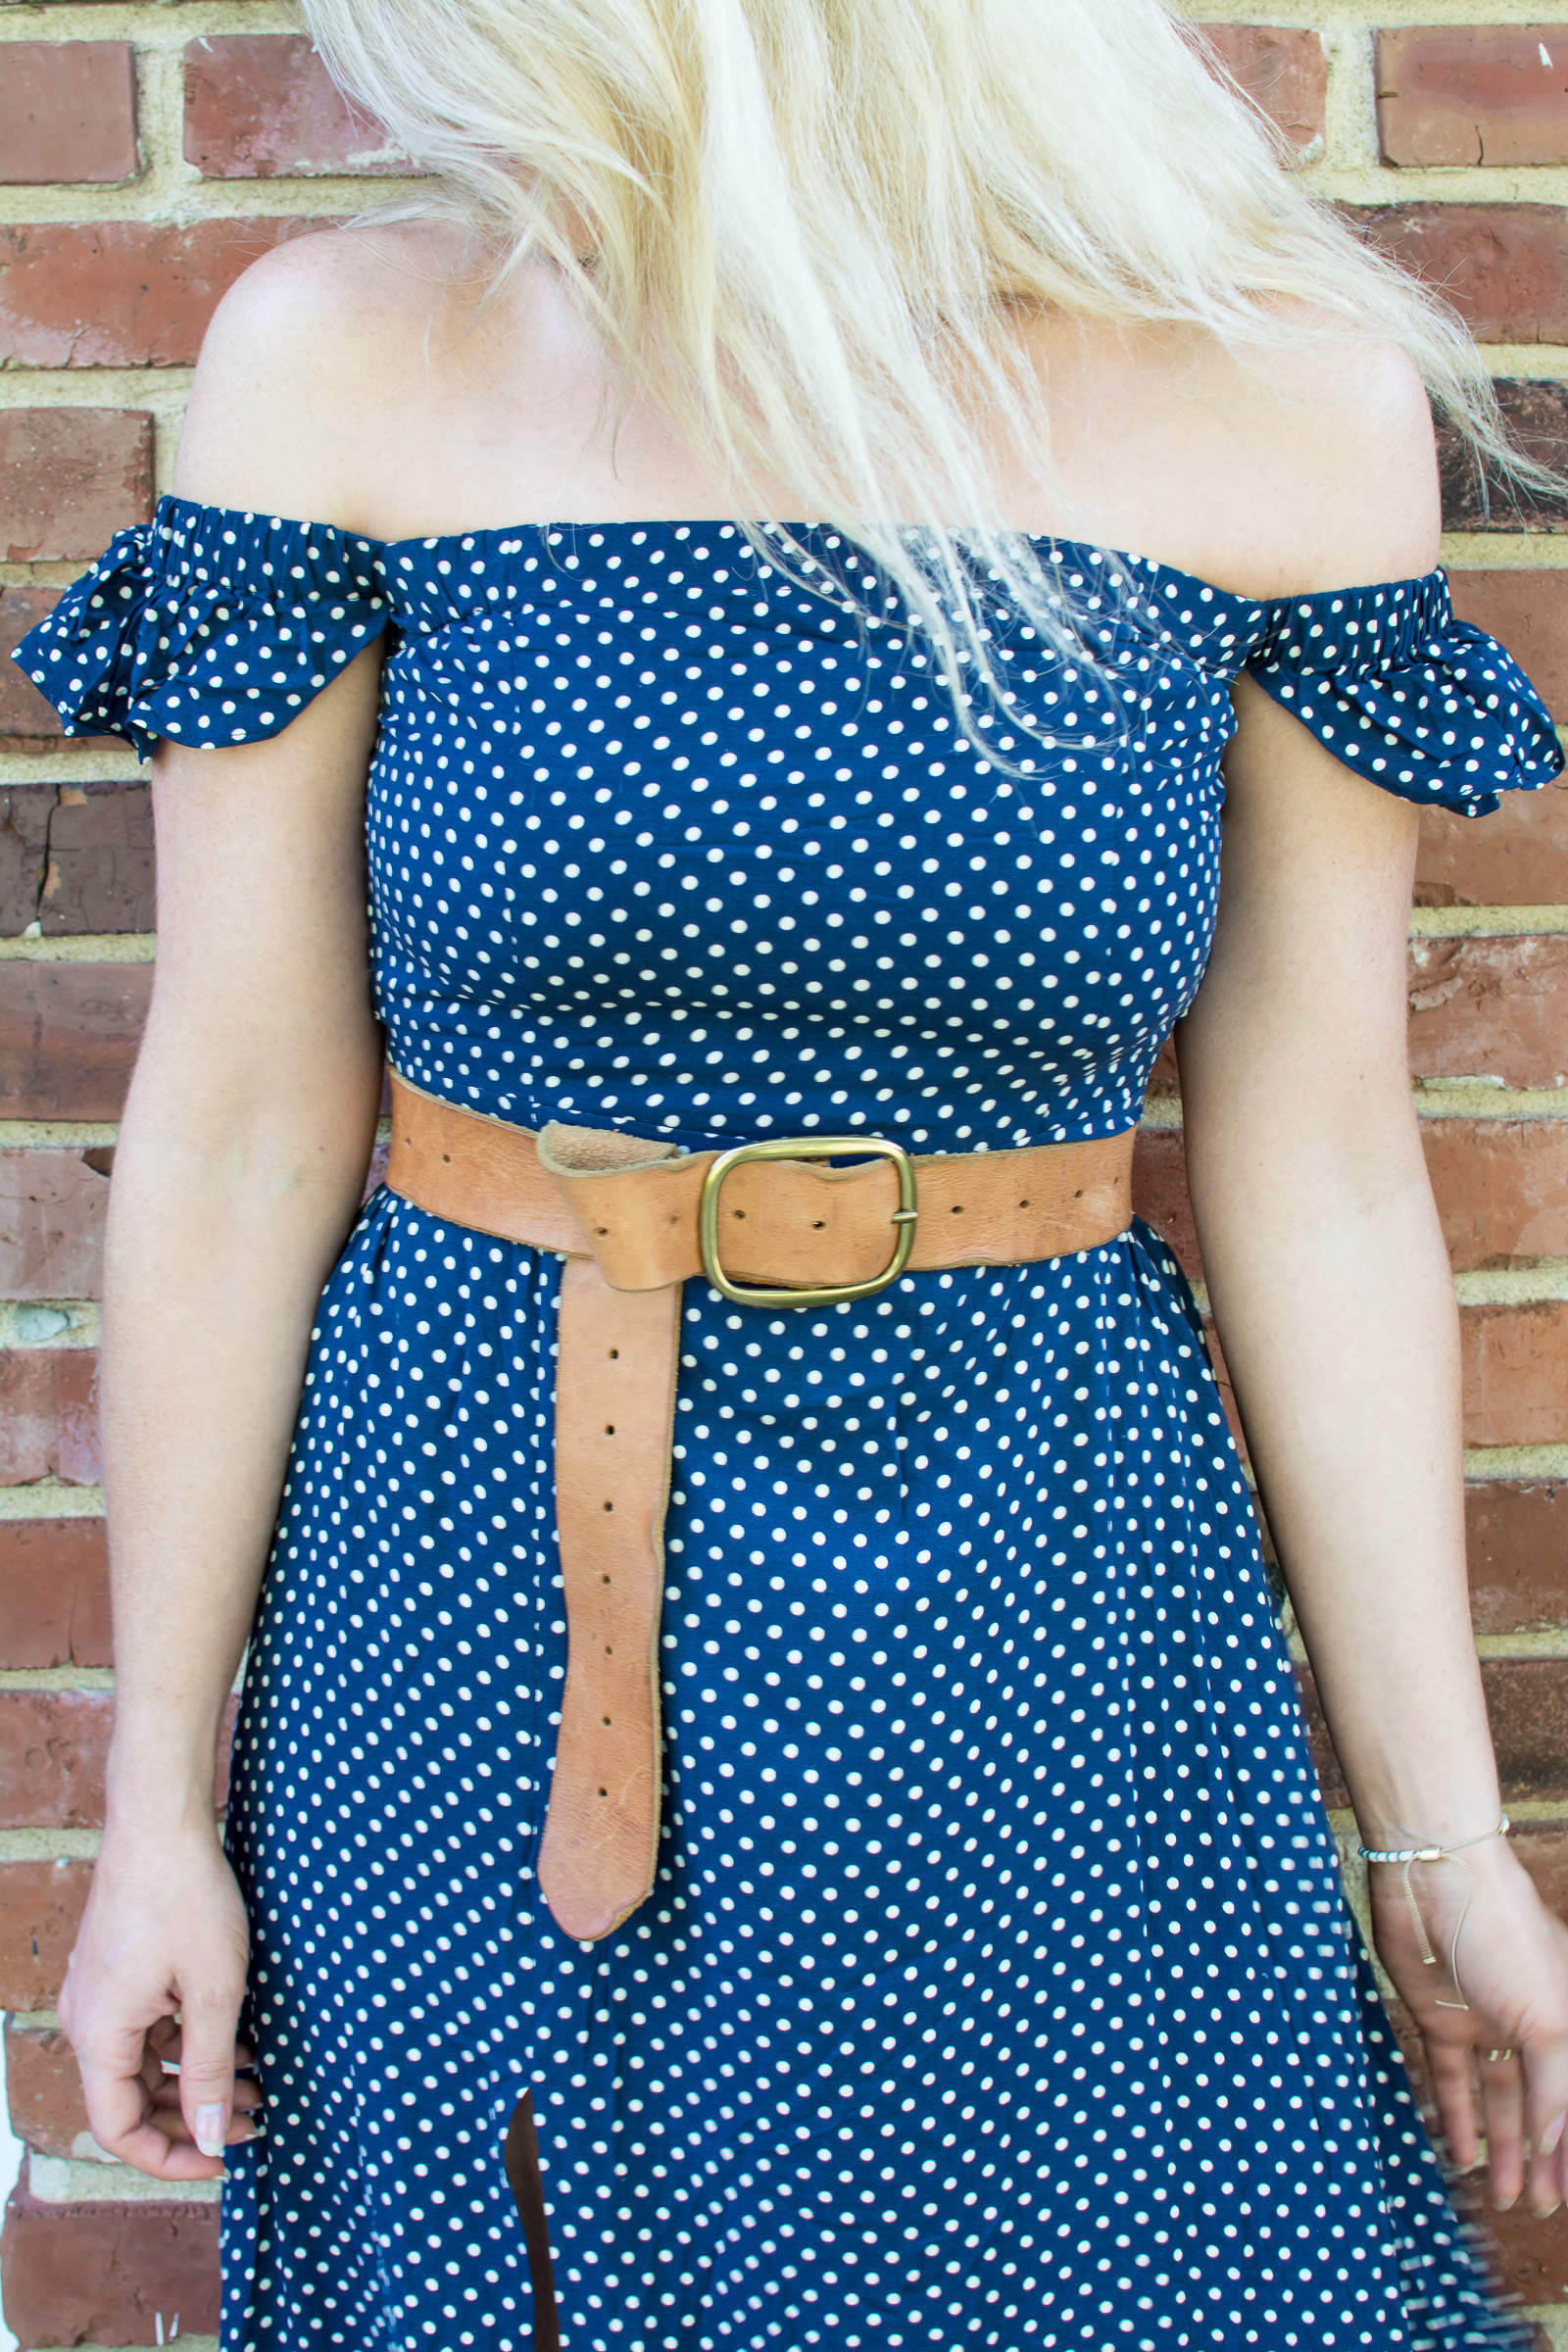 Navy Polka Dot Maxi Dress Perfect for Summer-to-Fall Outfitting. | Ashley from Le Stylo Rouge